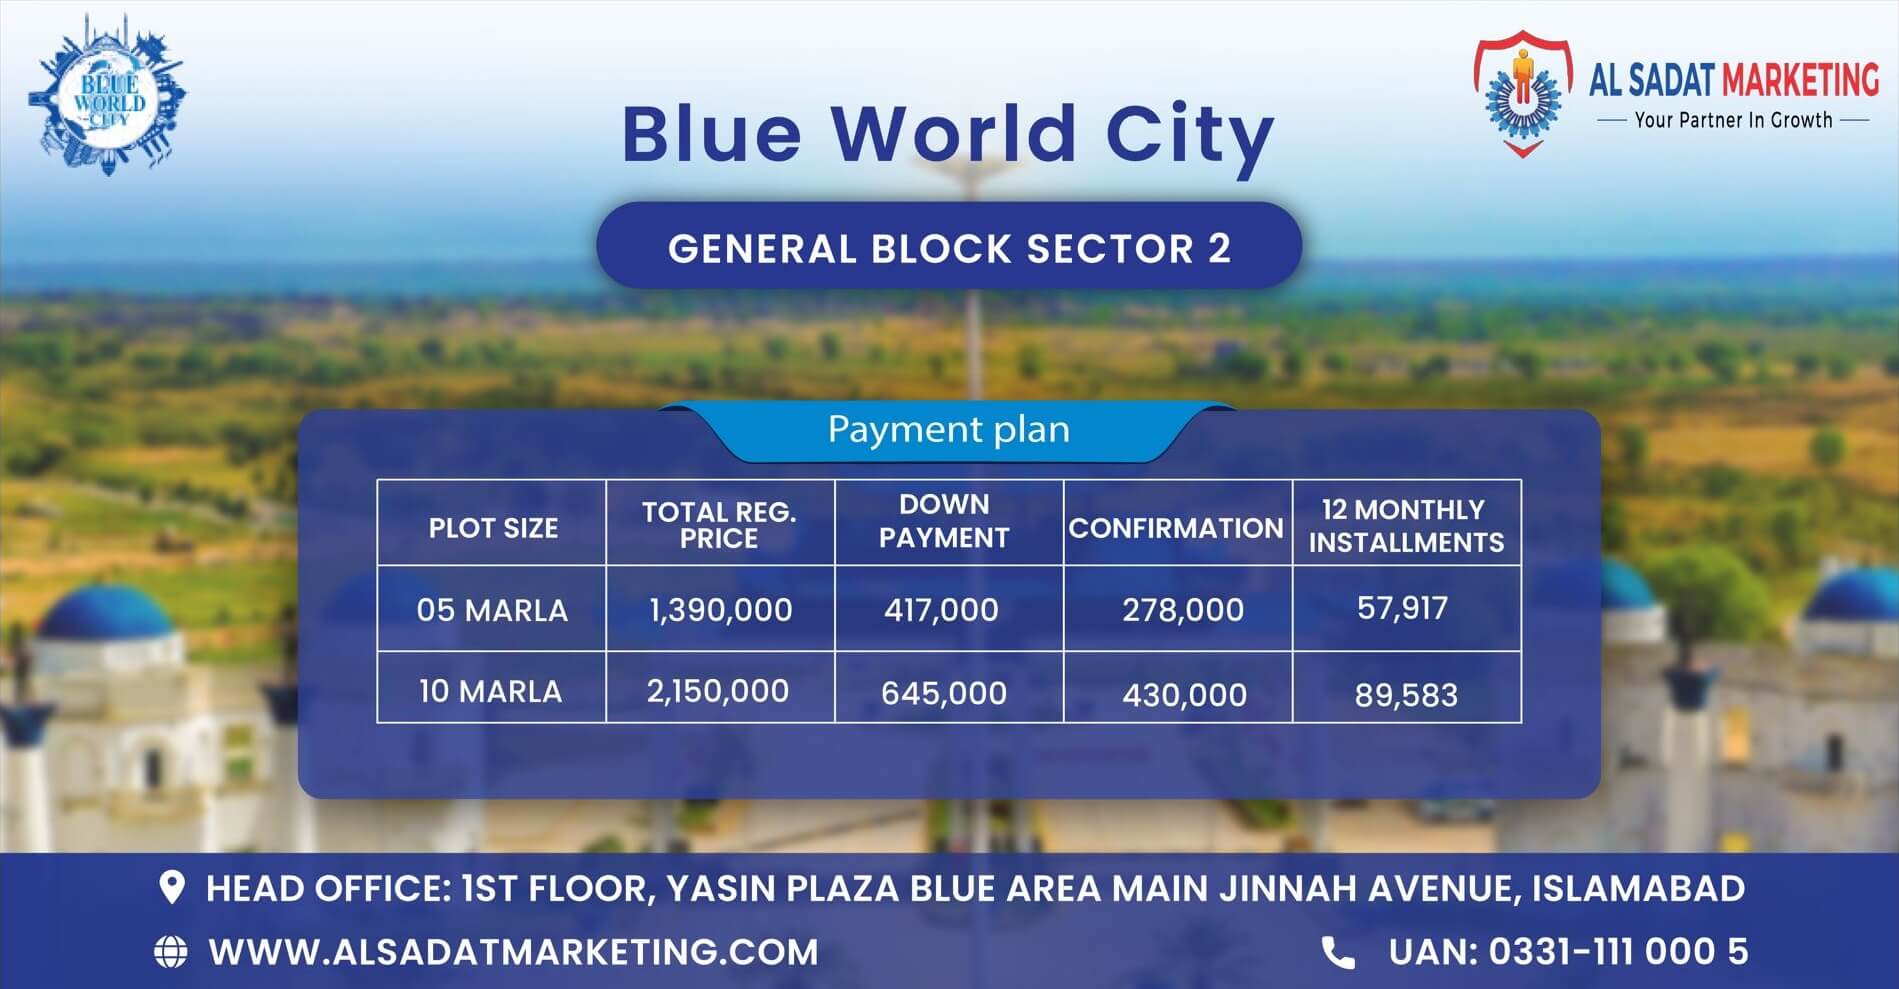 blue world city residential plots payment plan – blue world city islamabad residential plots payment plan – blue world city rawalpindi residential plots payment plan – blue world city general block sector 2 payment plan – blue world city islamabad general block sector 2 payment plan – blue world city rawalpindi general block sector 2 payment plan – blue world city payment plan – blue world city islamabad payment plan - blue world city rawalpindi payment plan – blue world city– blue world city islamabad – blue world city rawalpindi– blue world city housing society – blue world city islamabad housing society – blue world city real estate project – blue world city islamabad real estate project - al sadat marketing - alsadat marketing - al-sadat marketing